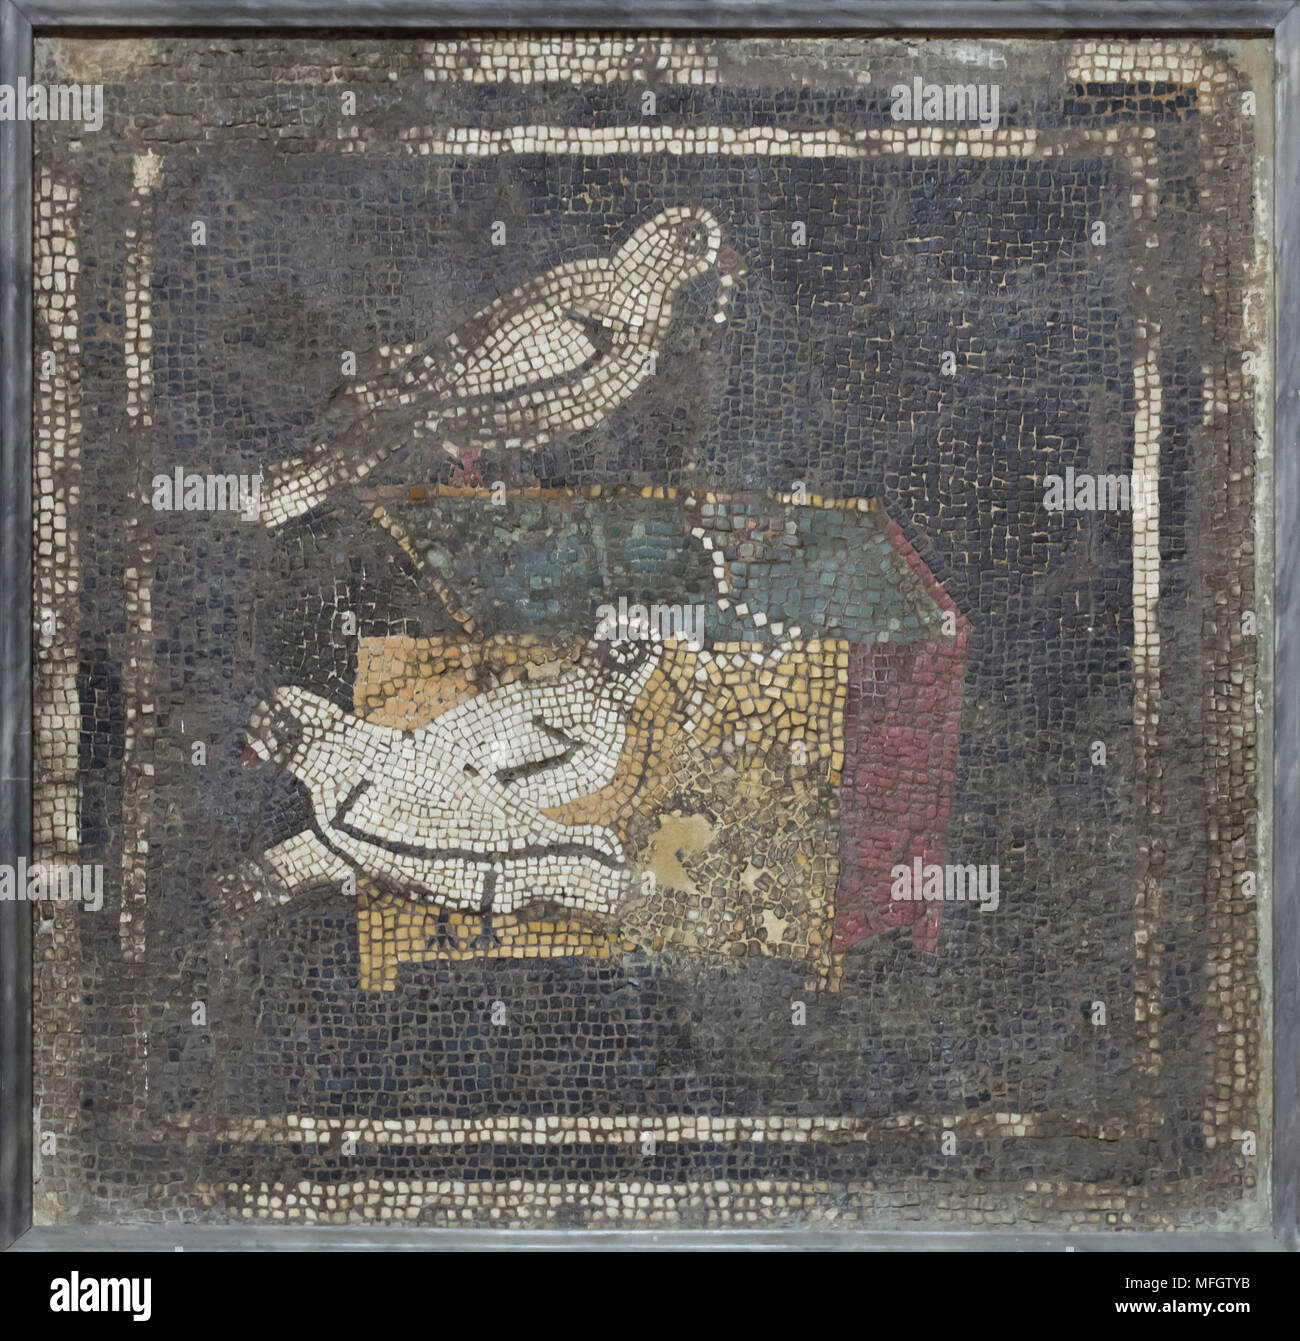 Doves on chest depicted in the Roman mosaic from the Casa del Fauno (House of the Faun) in Pompeii, now on display in the National Archaeological Museum (Museo Archeologico Nazionale di Napoli) in Naples, Campania, Italy. Stock Photo